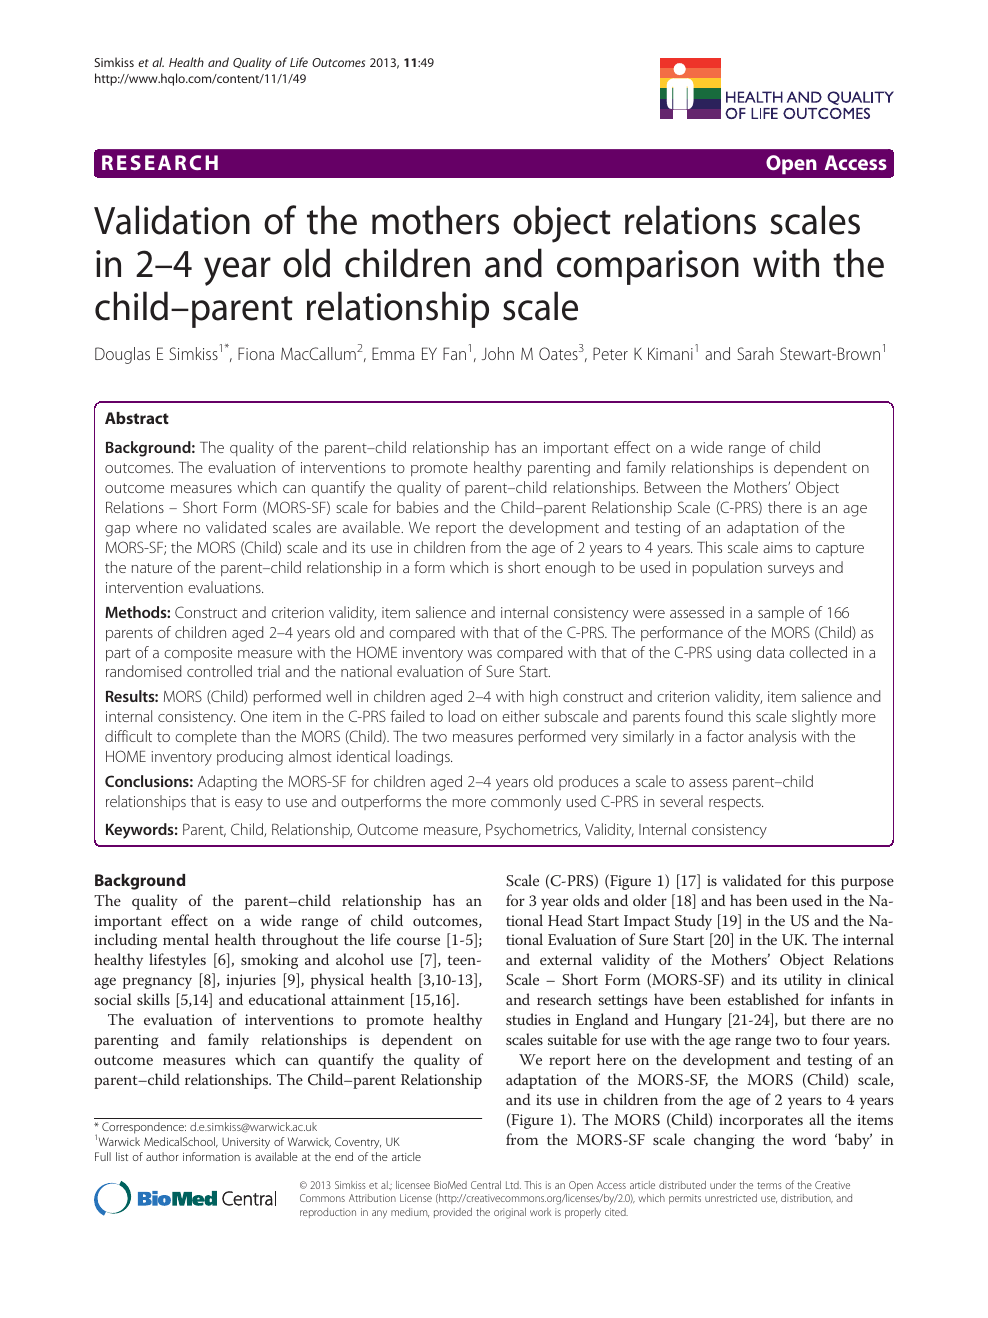 Validation Of The Mothers Object Relations Scales In 2 4 Year Old Children And Comparison With The Child Parent Relationship Scale Topic Of Research Paper In Psychology Download Scholarly Article Pdf And Read